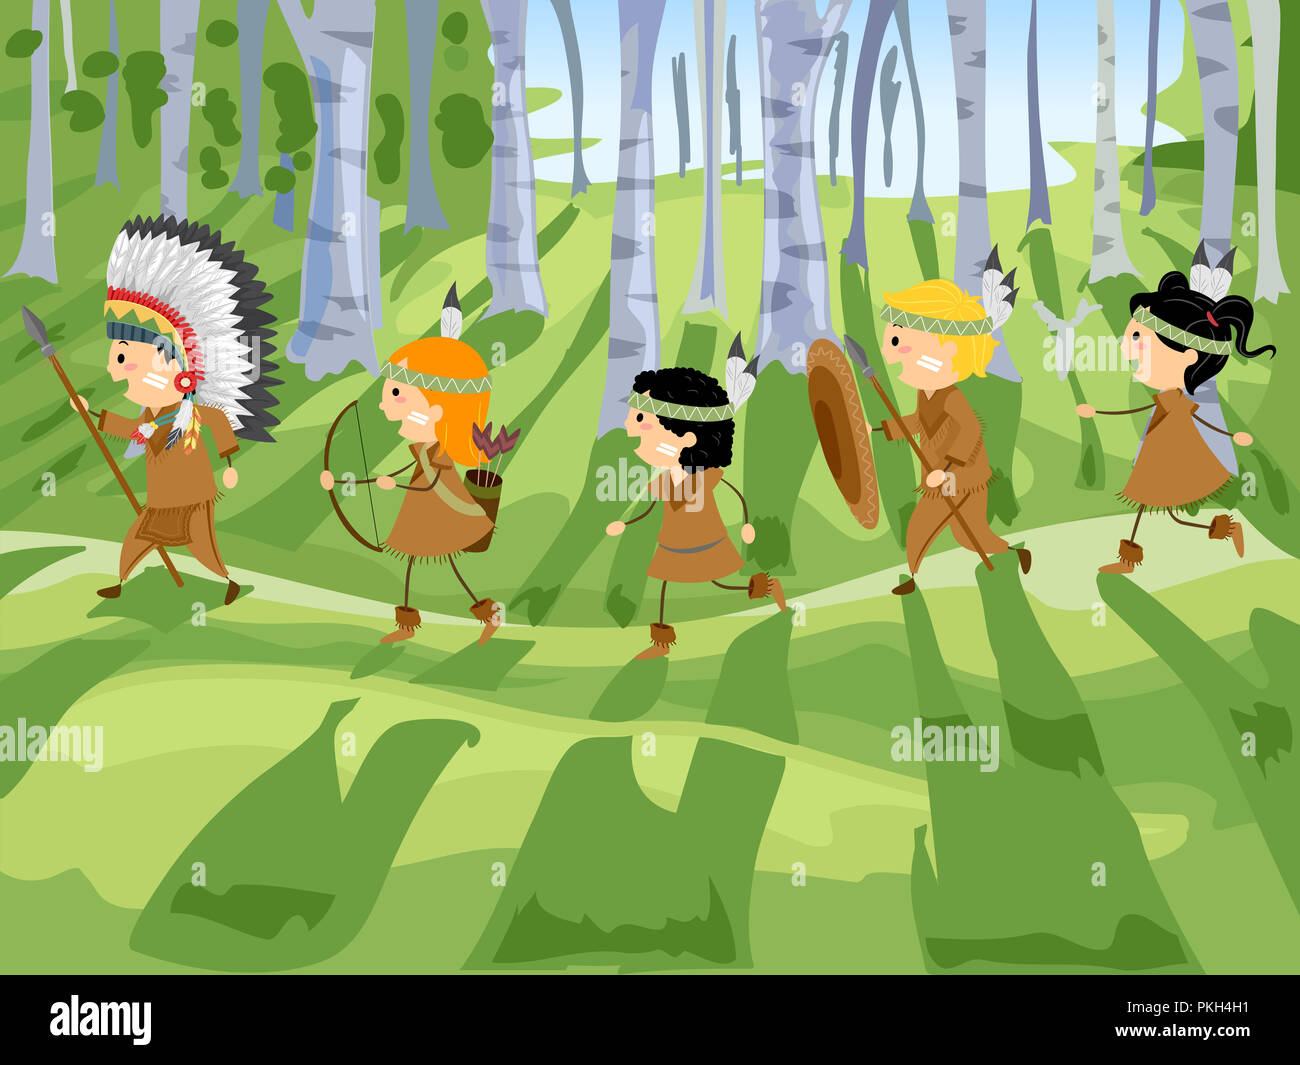 Illustration of Stickman Kids in Native American Costume Running in the  Forest Hunting Stock Photo - Alamy